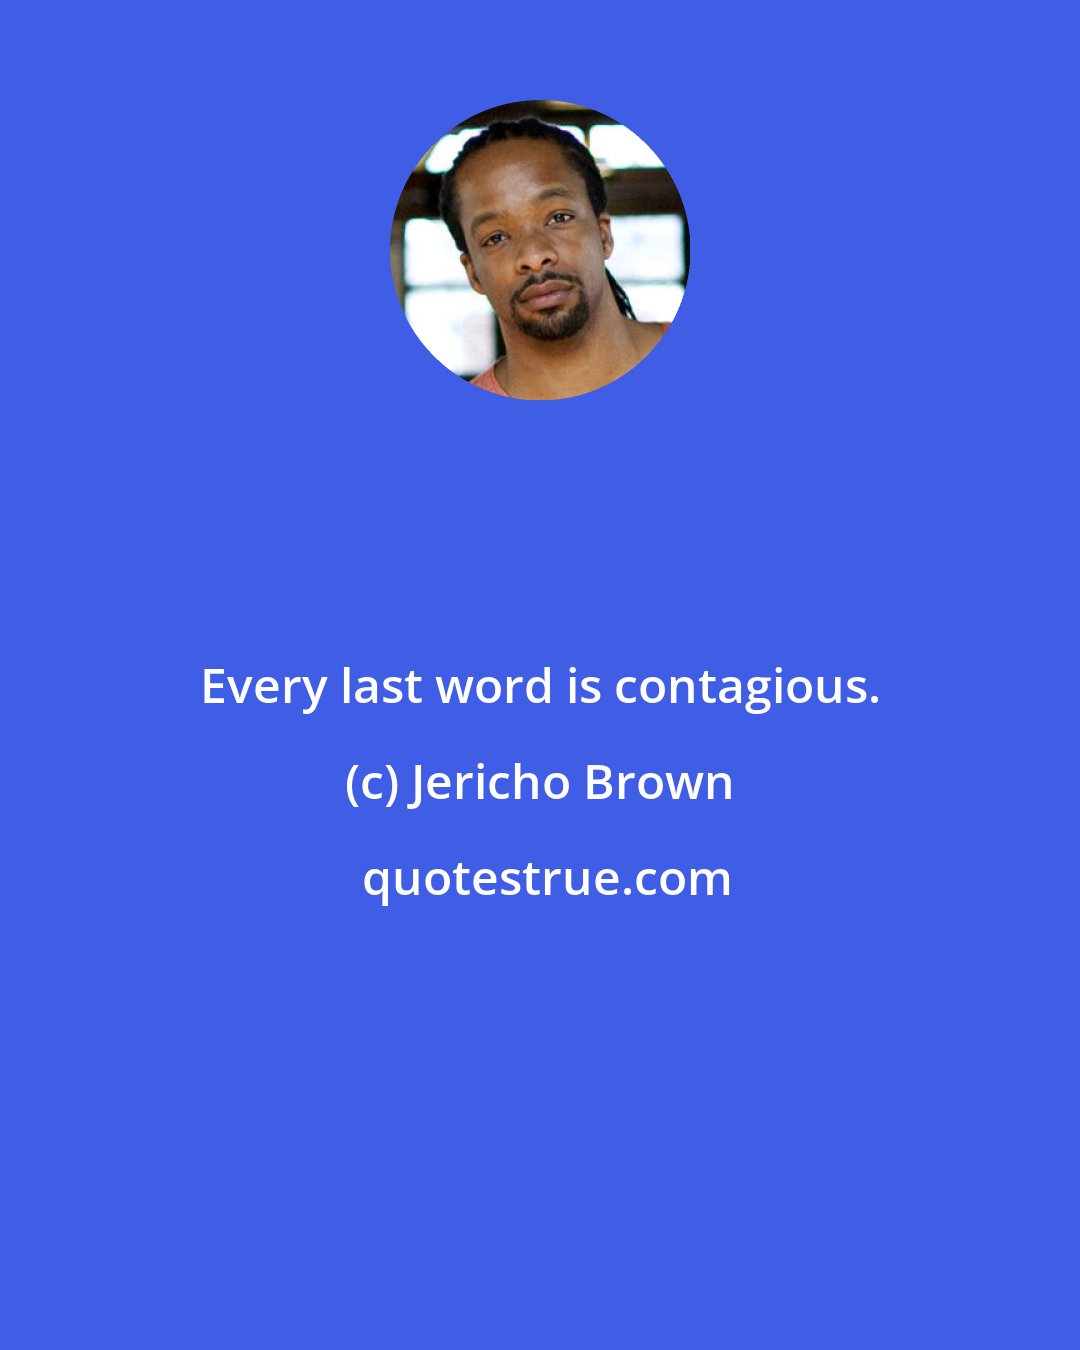 Jericho Brown: Every last word is contagious.